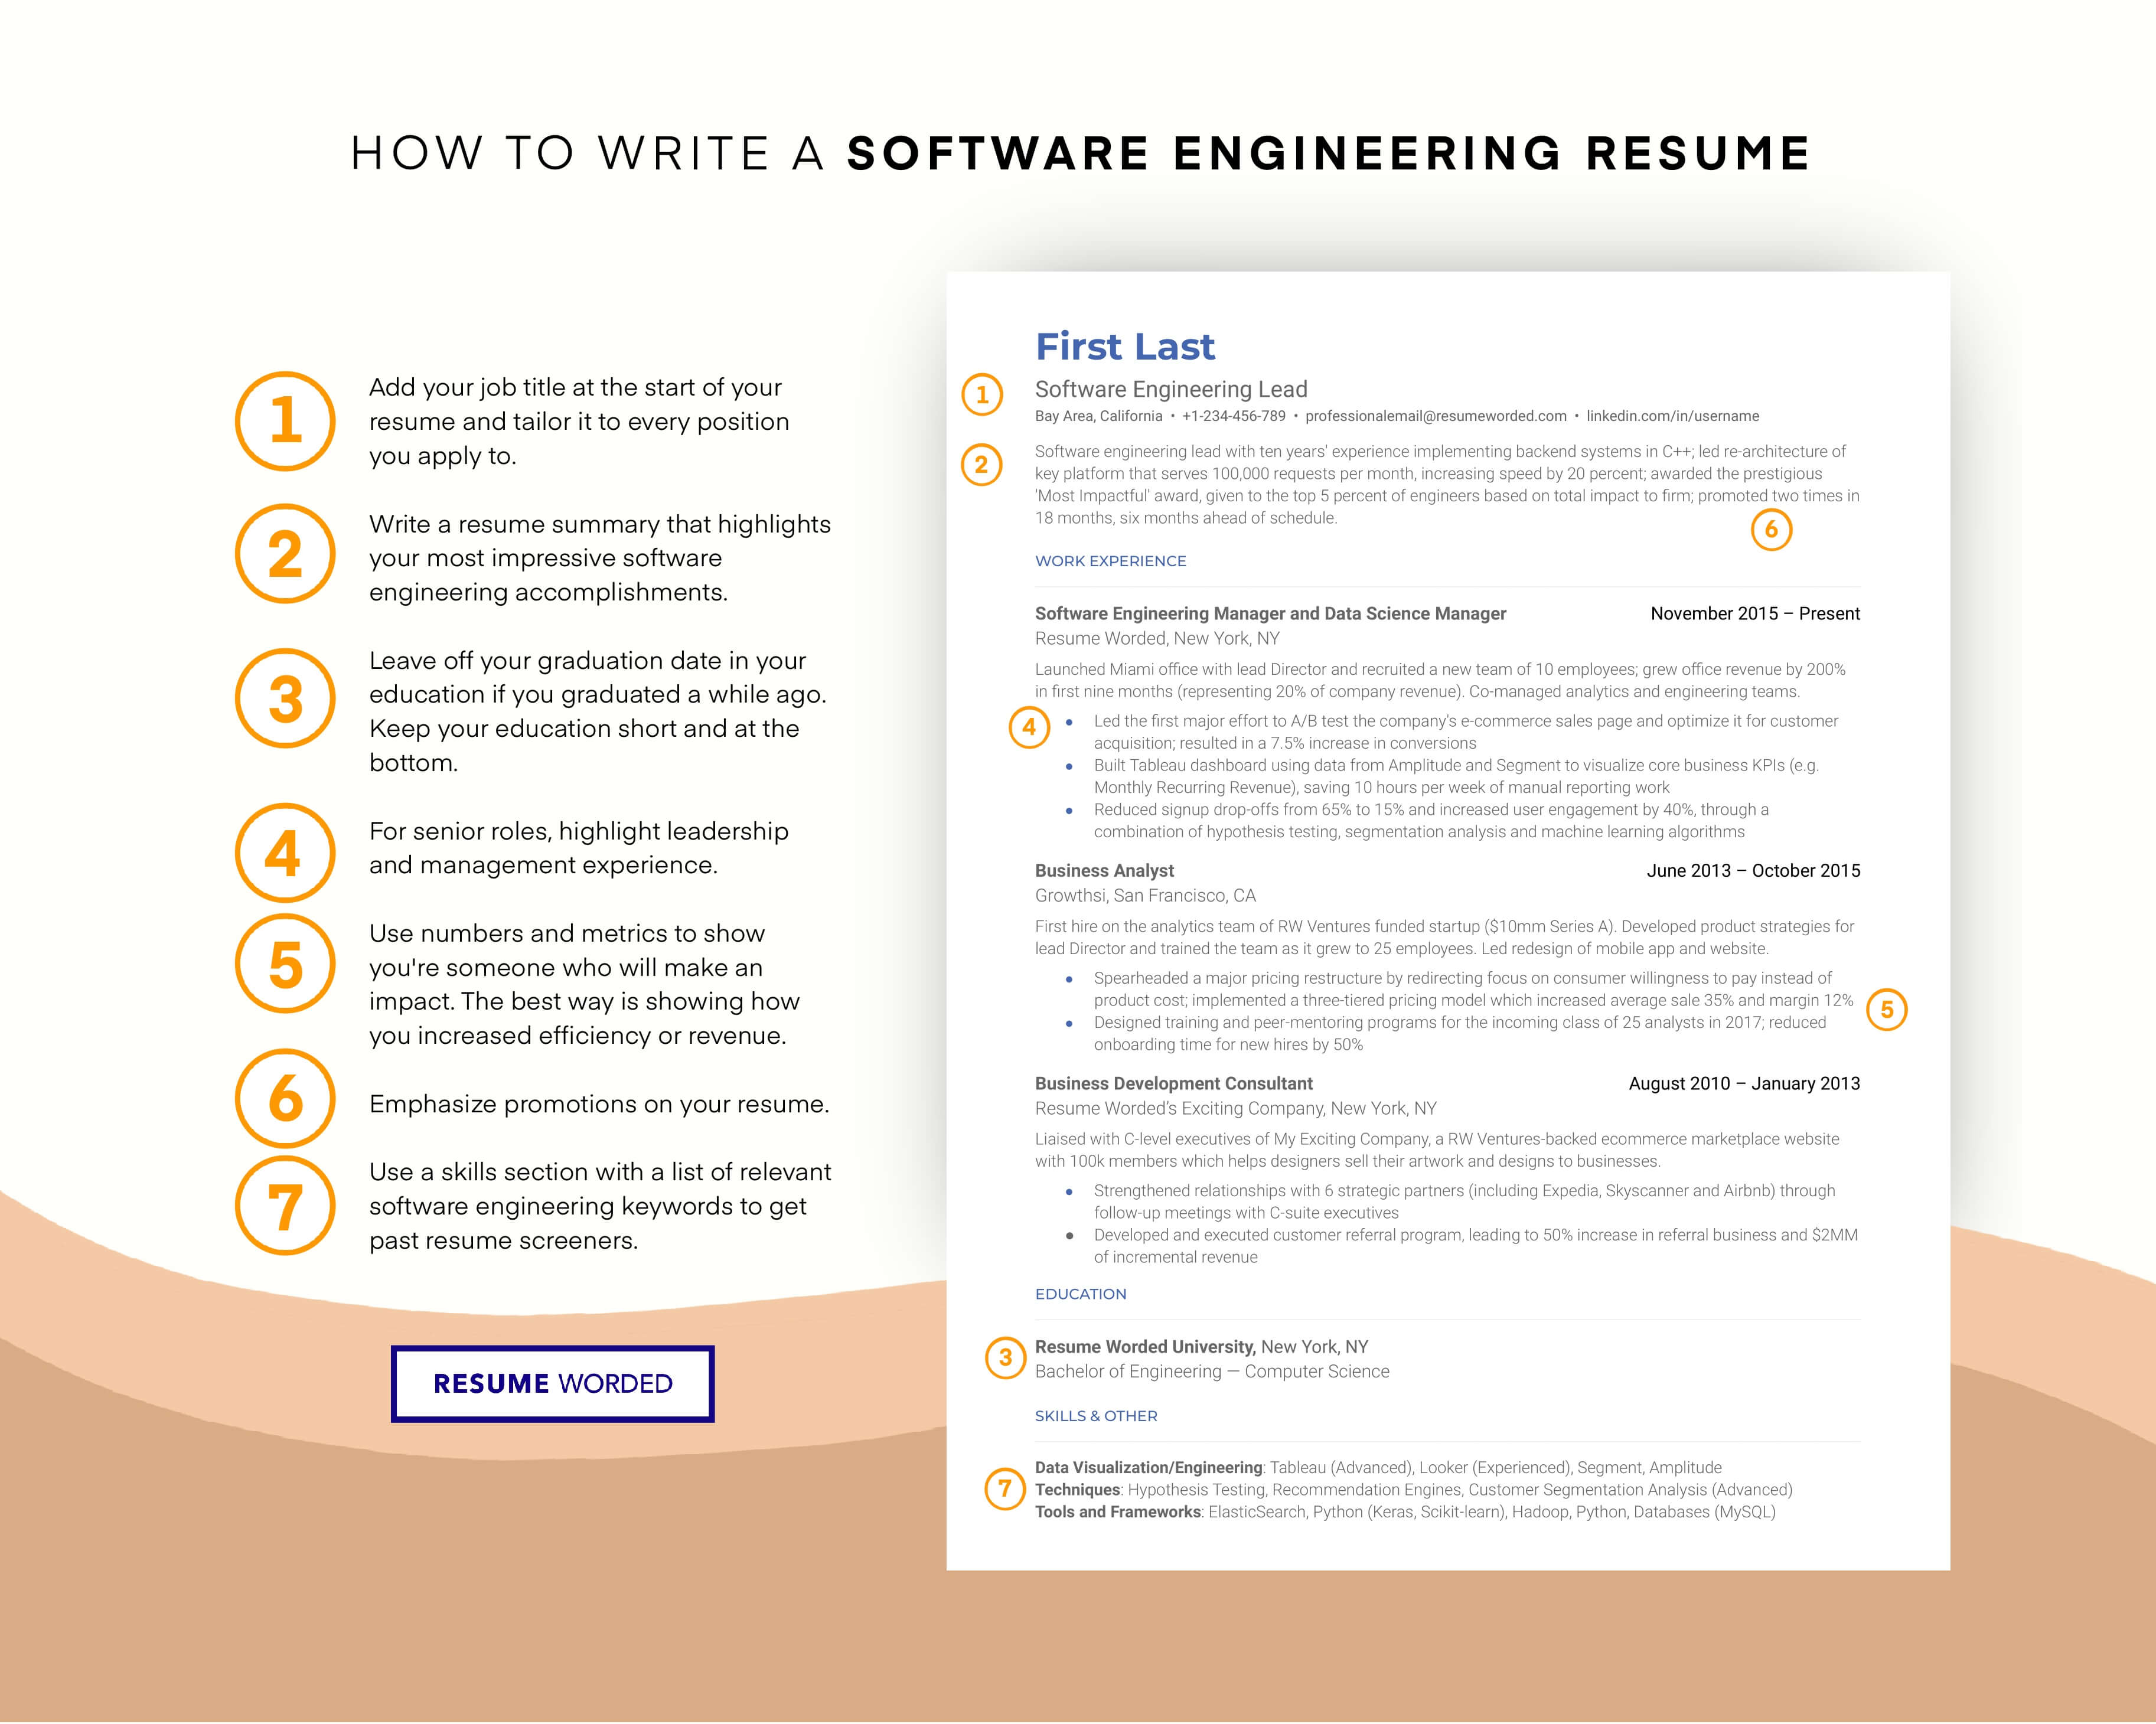 Demonstrate your ability to work with computer-based modeling software. - System Planning Engineer  Resume